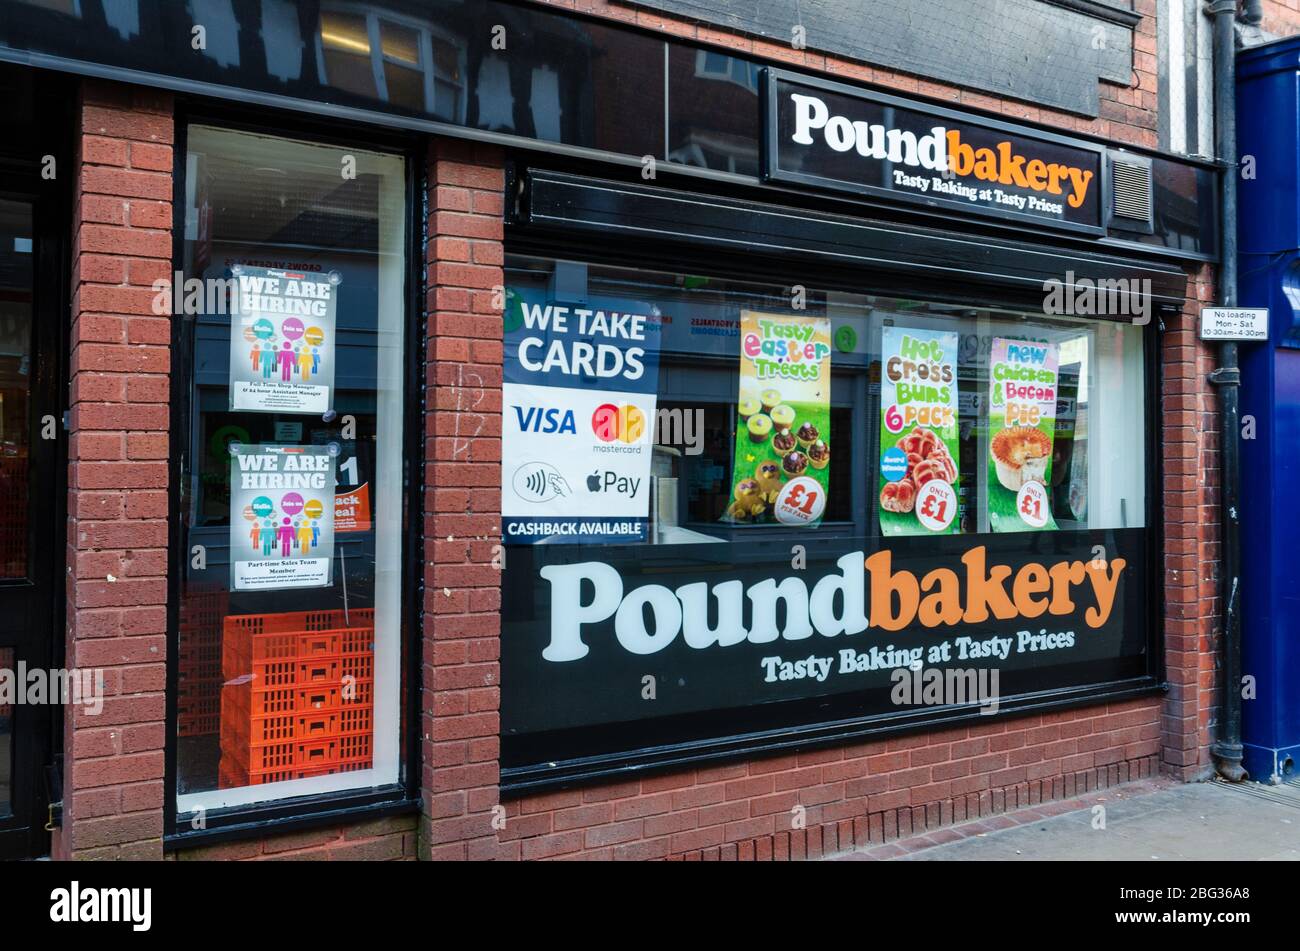 Chester, UK: Mar 1, 2020: A Poundbakery store displays posters advertising available jobs. Additional posters promote some Easter offers. Stock Photo